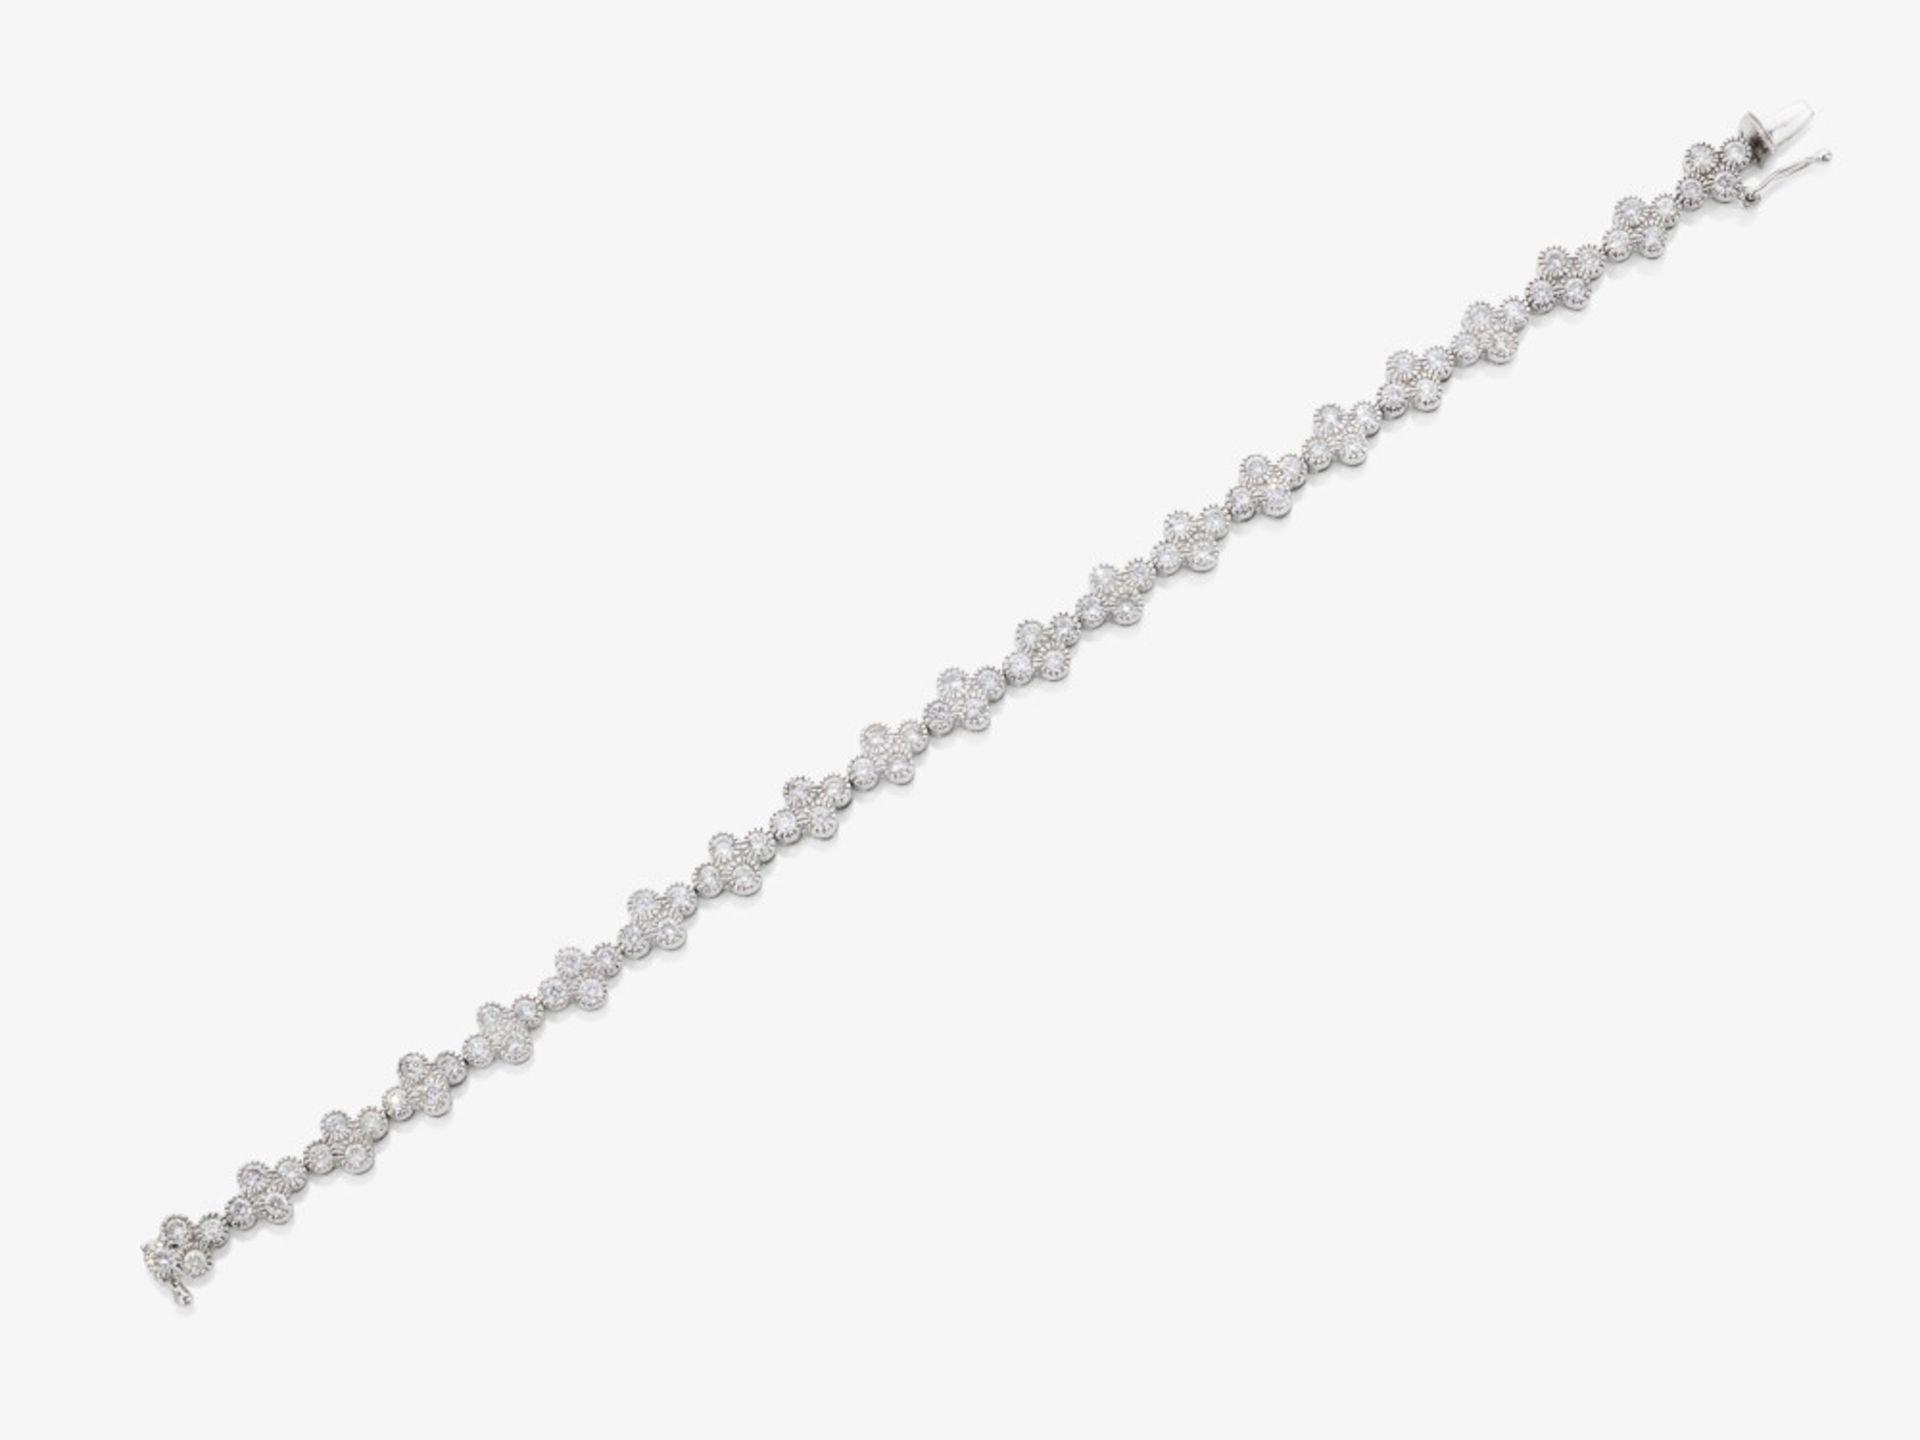 A fancy link bracelet decorated with brilliant-cut diamonds - America, 1990s - 2000s - Image 2 of 2